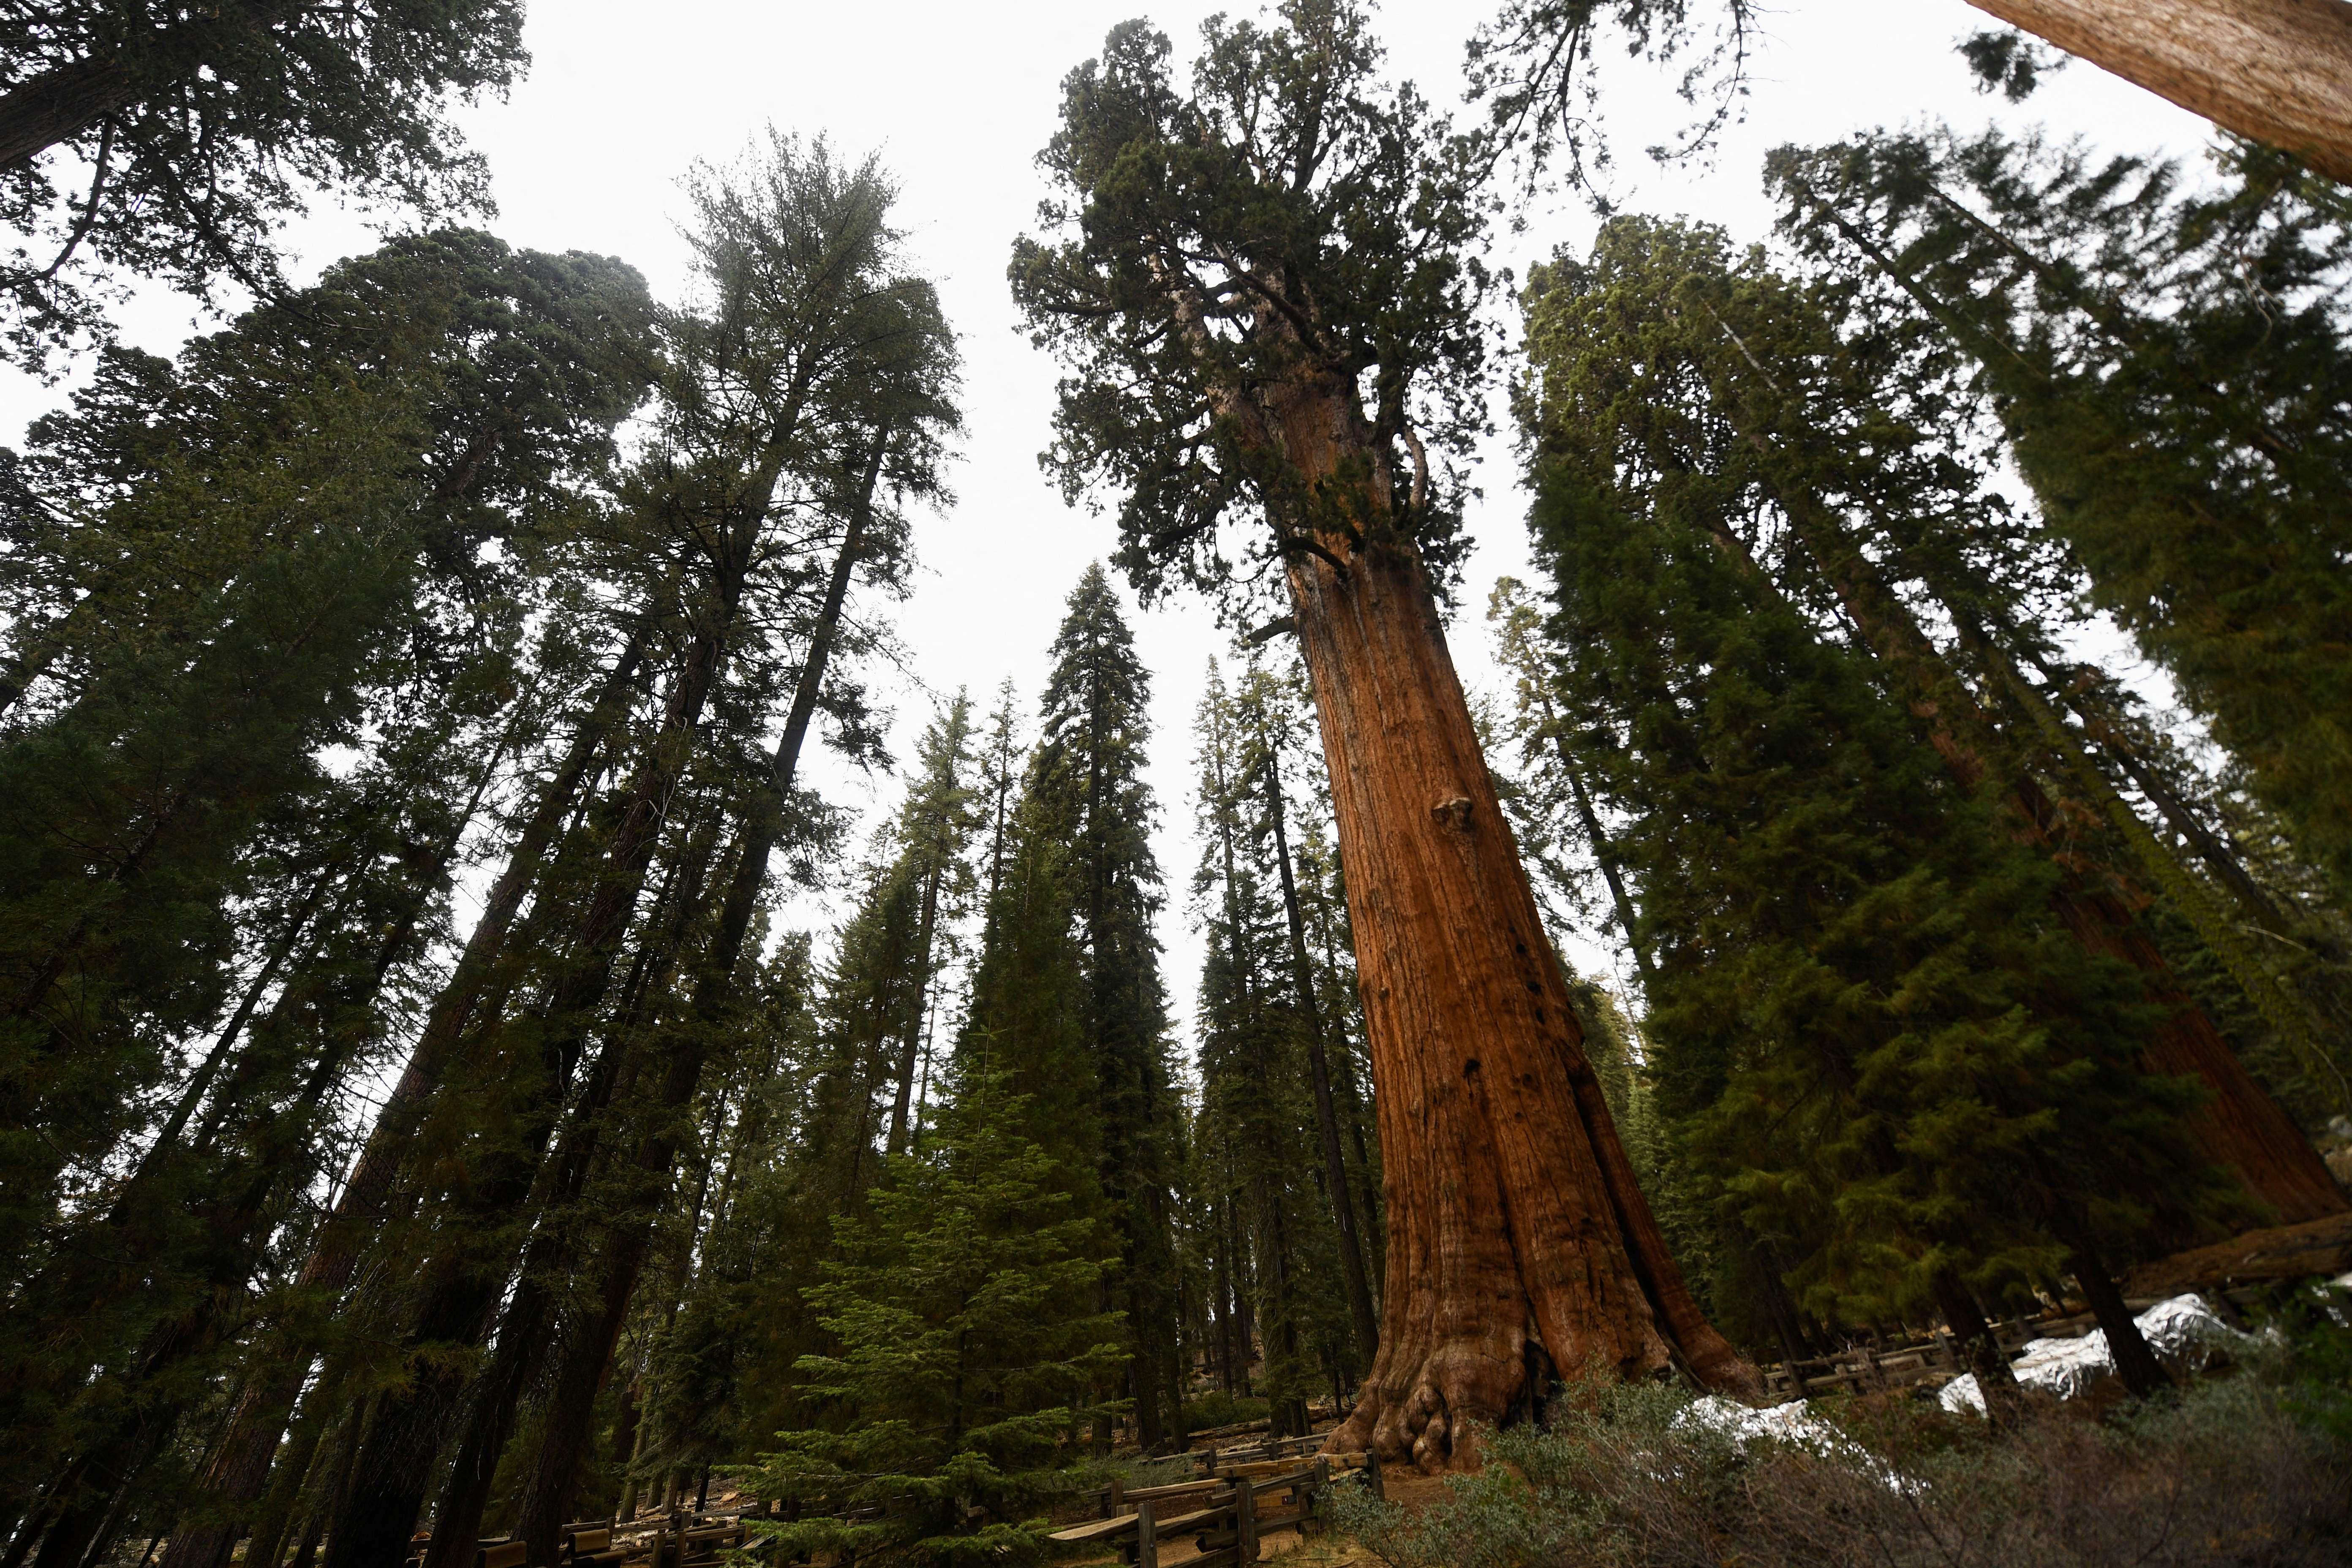 The General Sherman giant sequoia tree stands in the Giant Forest after being unwrapped by US National Park Service (NPS) personnel during the KNP Complex Fire in Sequoia National Park near Three Rivers, California on October 22, 2021. 